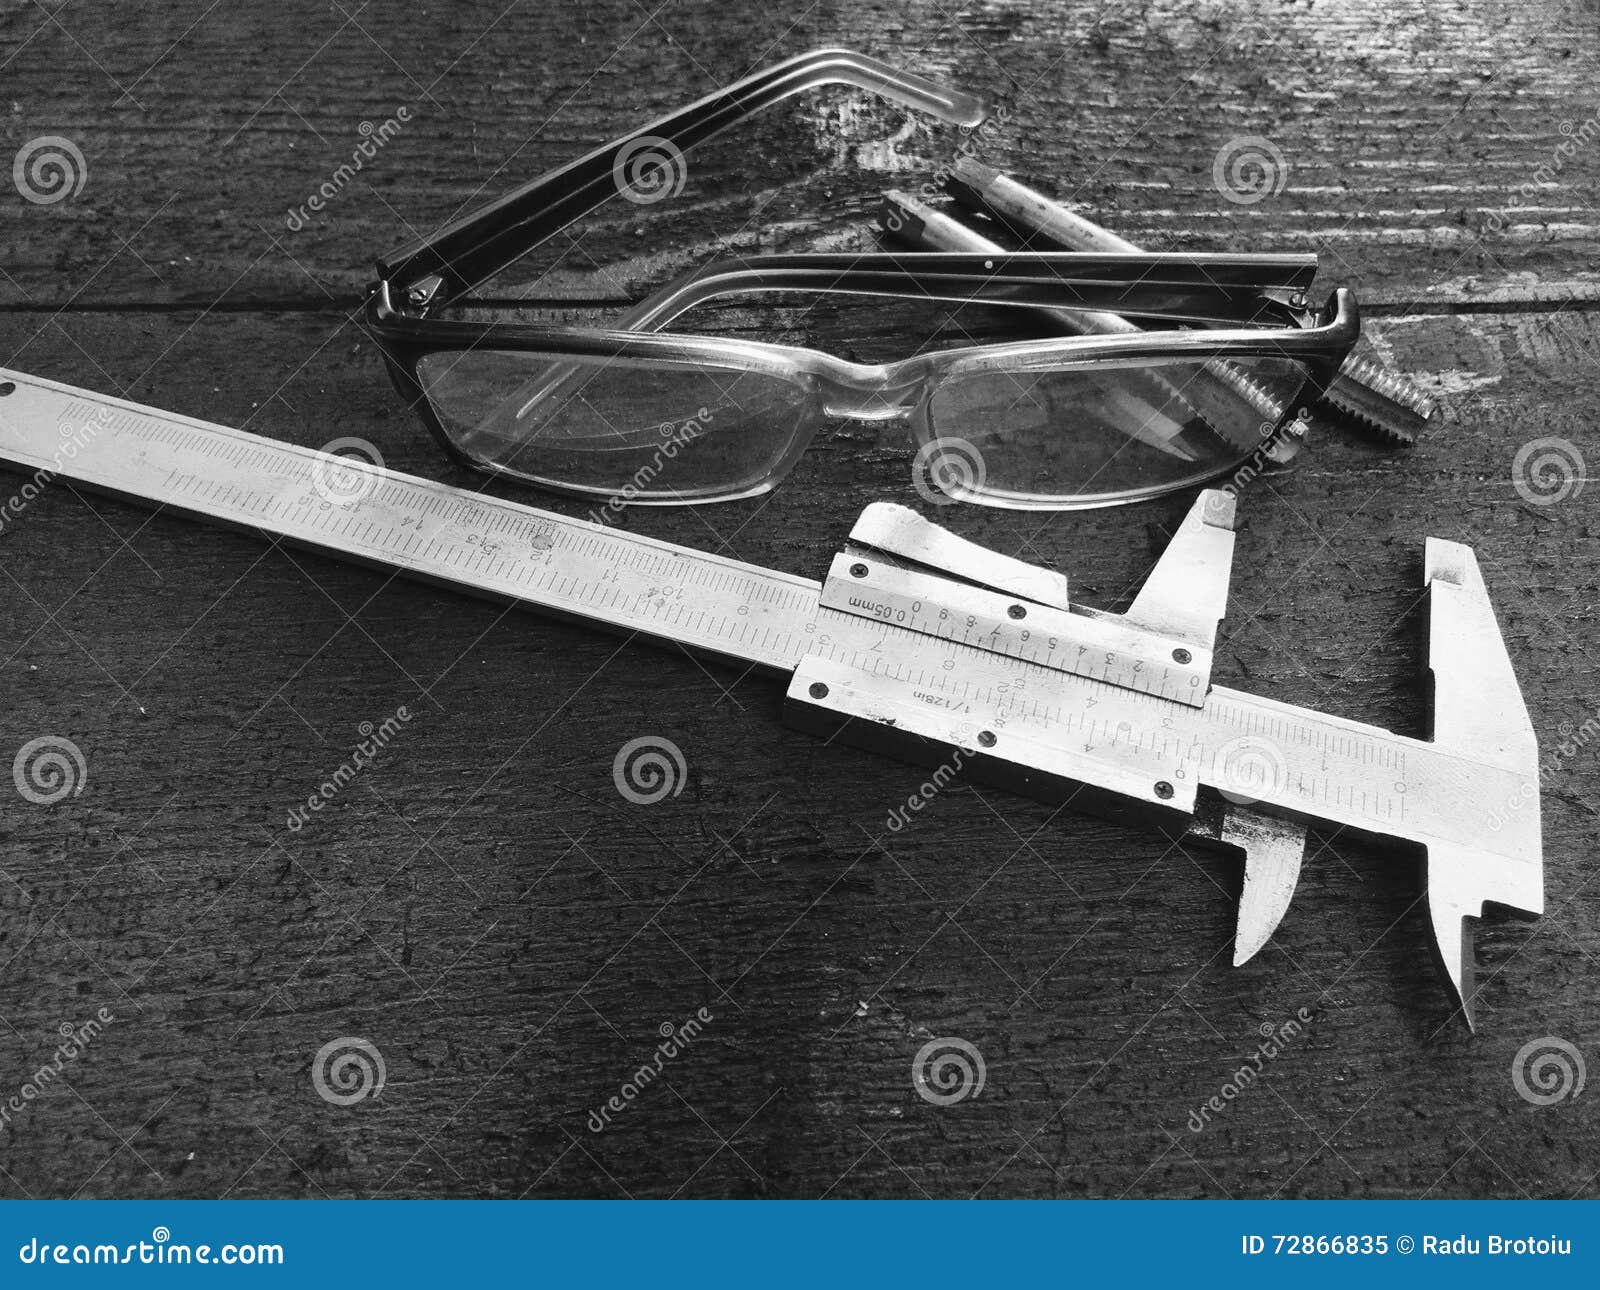 callipers and glasses